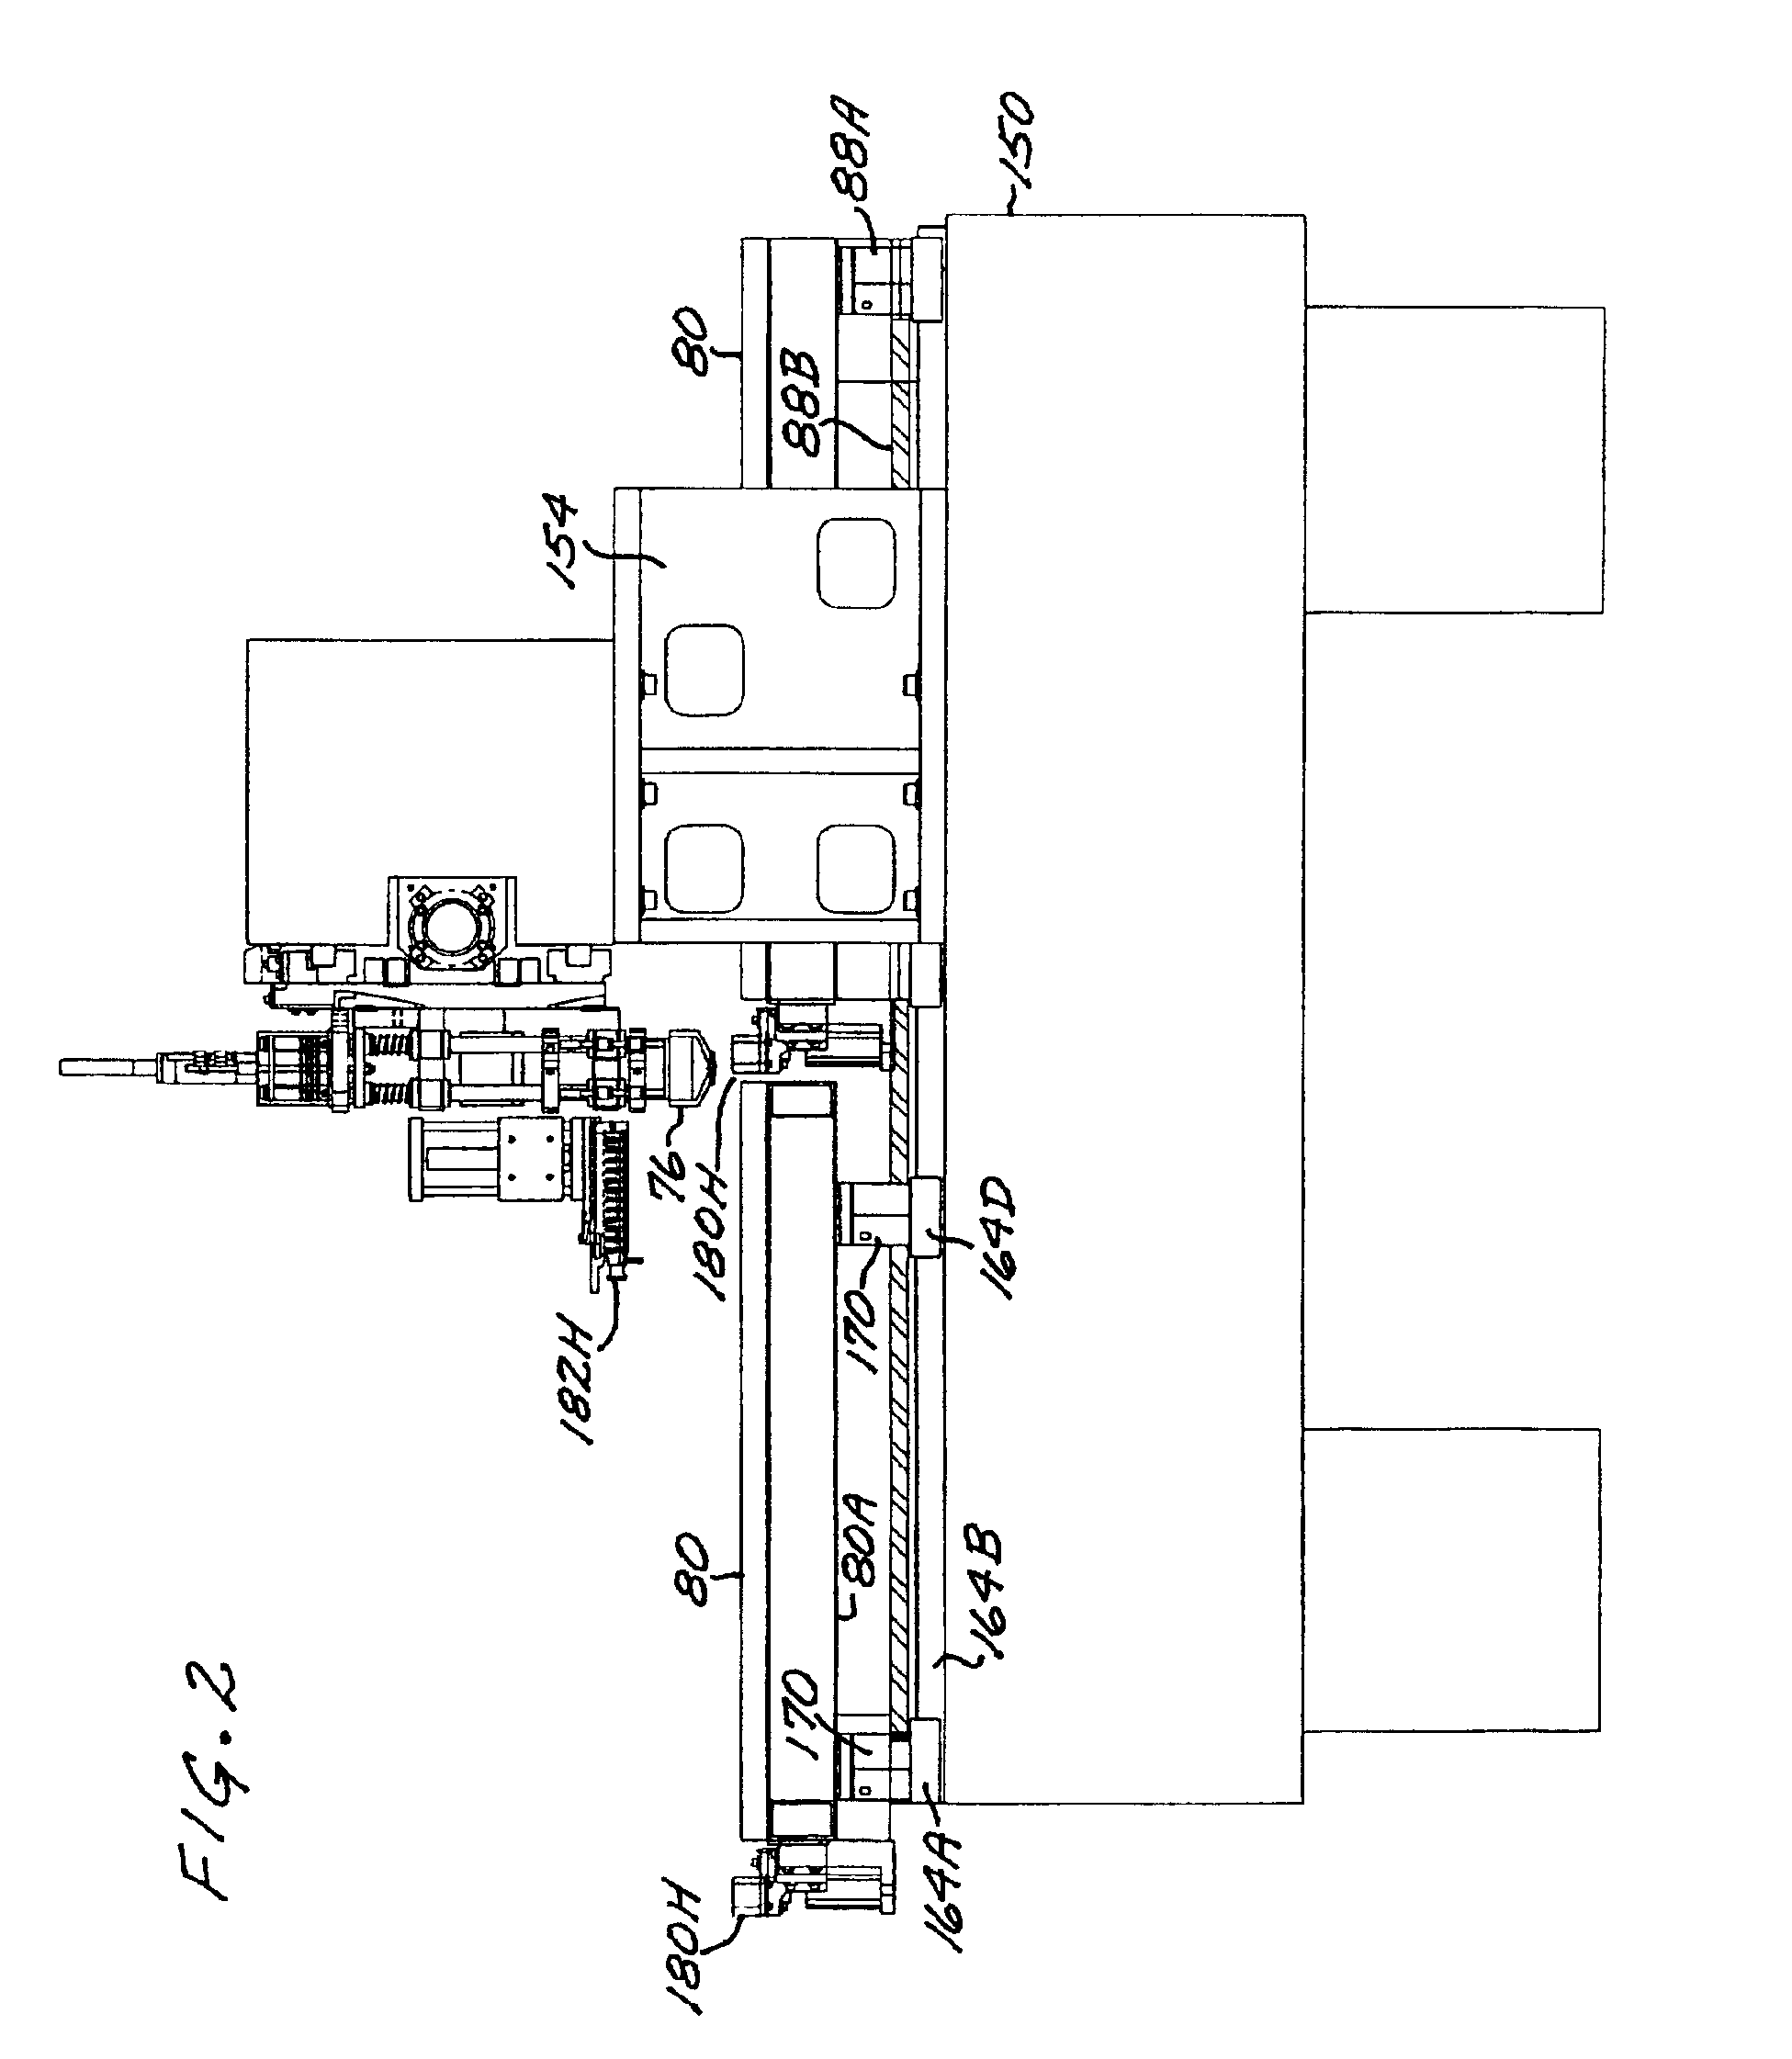 Hole forming system with ganged spindle set